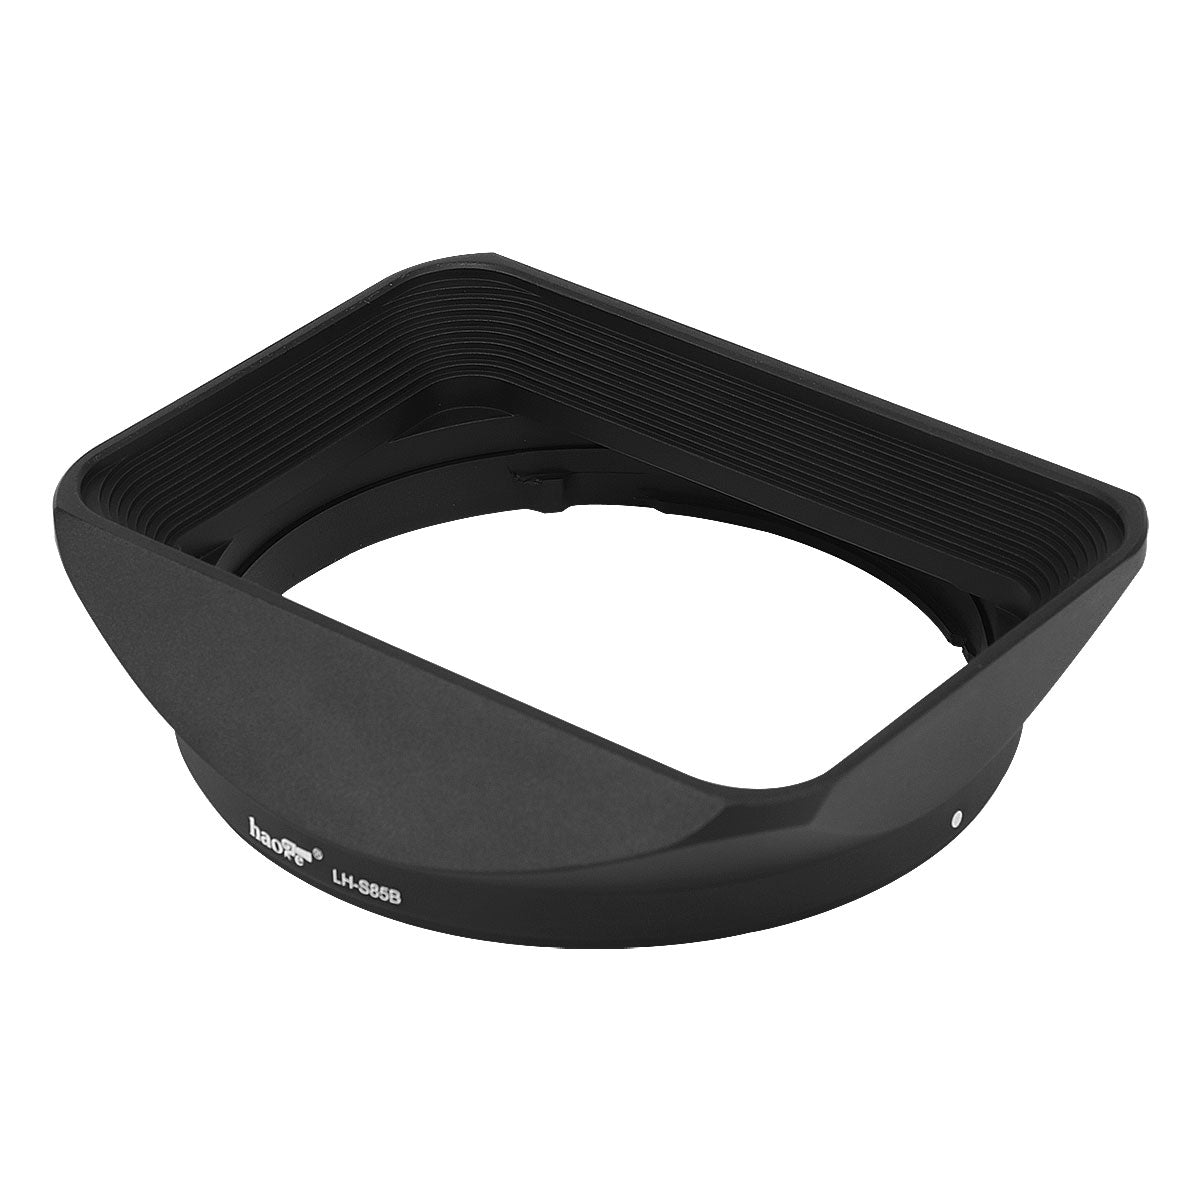 Haoge LH-S85B Bayonet Square Metal Lens Hood Shade with Cap for Sony FE 85mm F1.8 SEL85F18 Lens